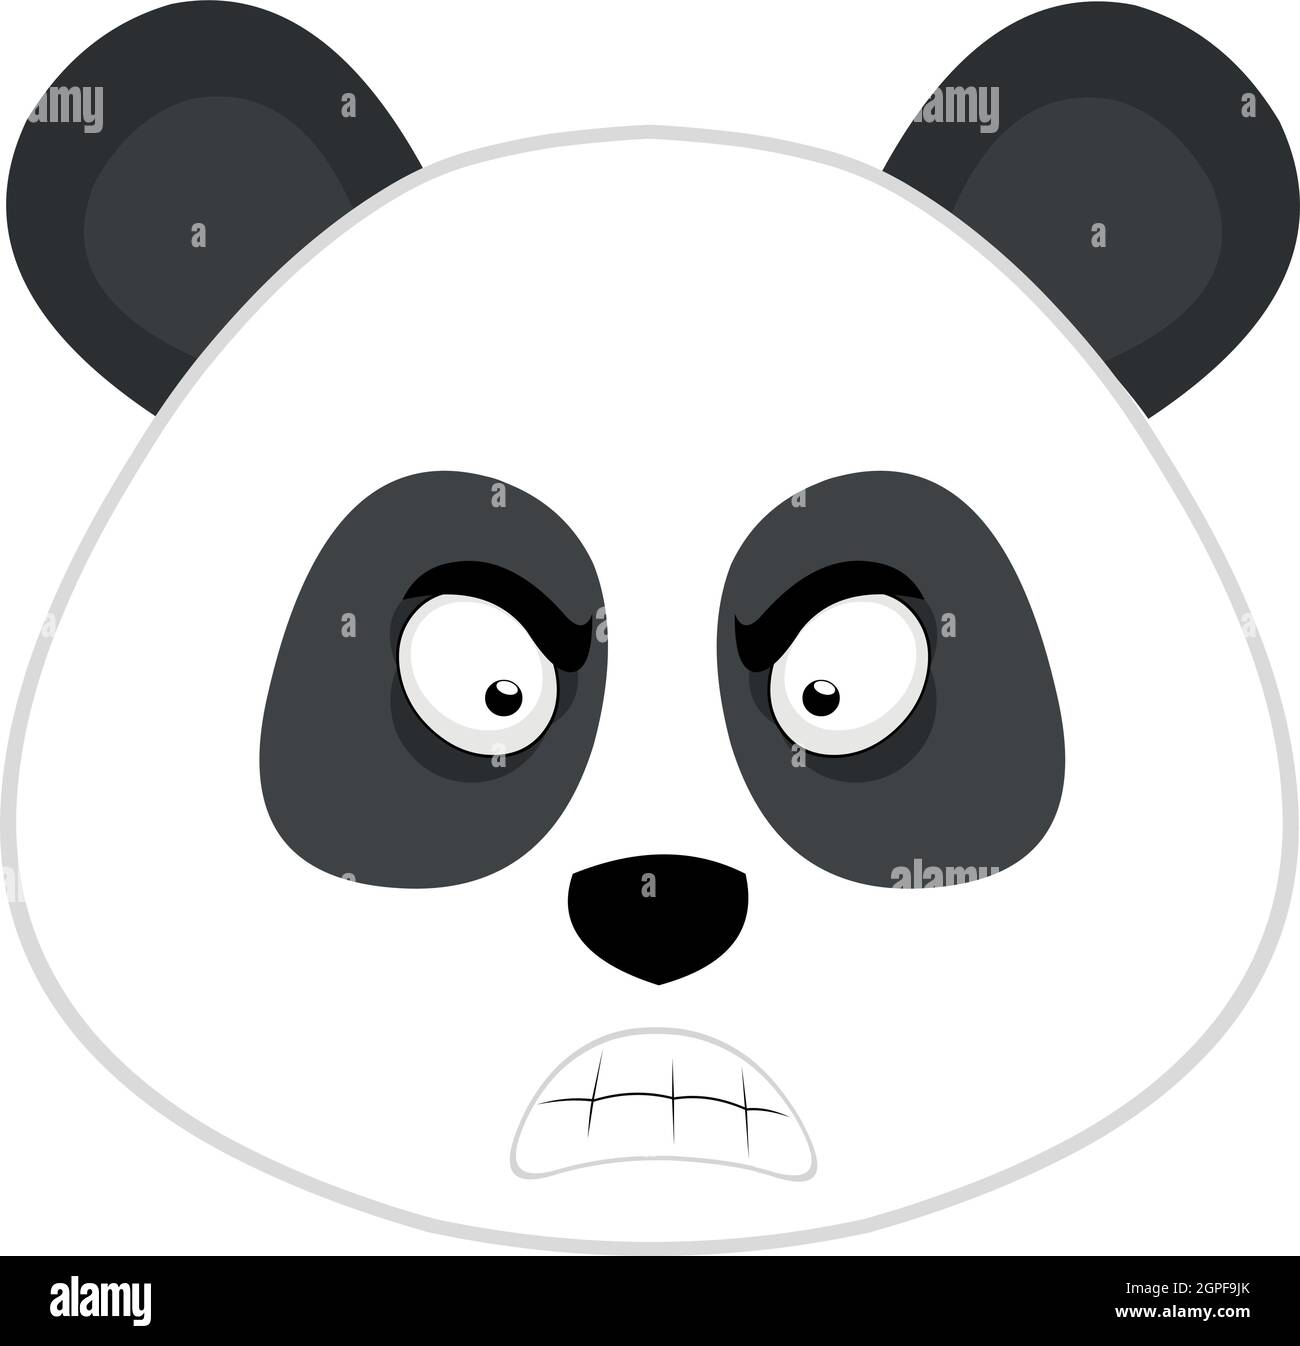 Vector illustration of the face of a cartoon panda bear, with an angry expression Stock Vector